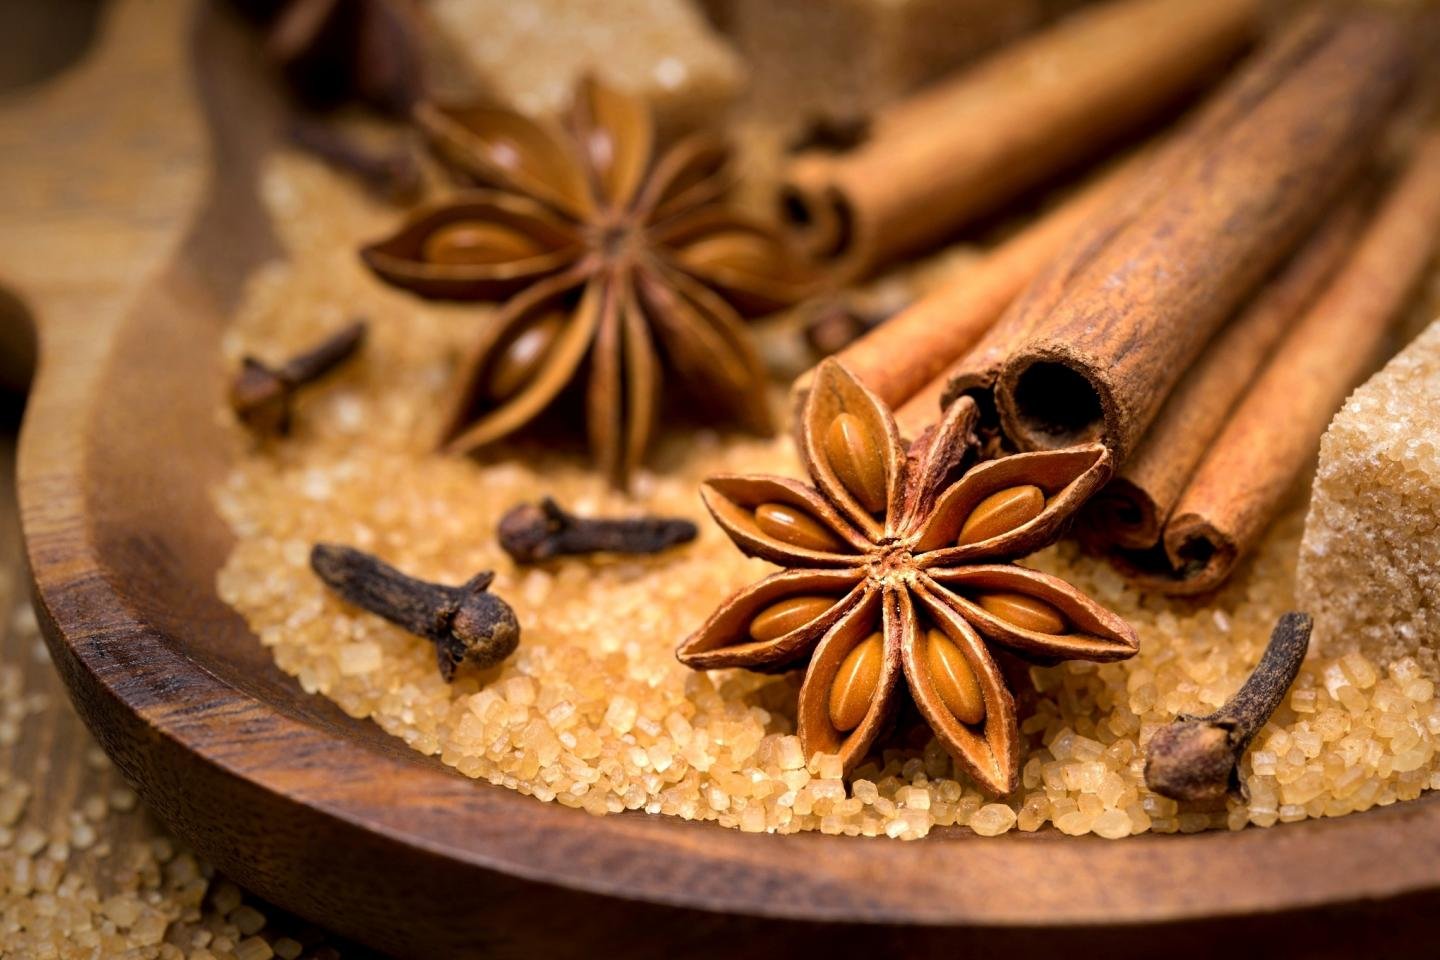 Best Herbs And Spices wallpaper ID:410367 for High Resolution hd 1440x960 computer